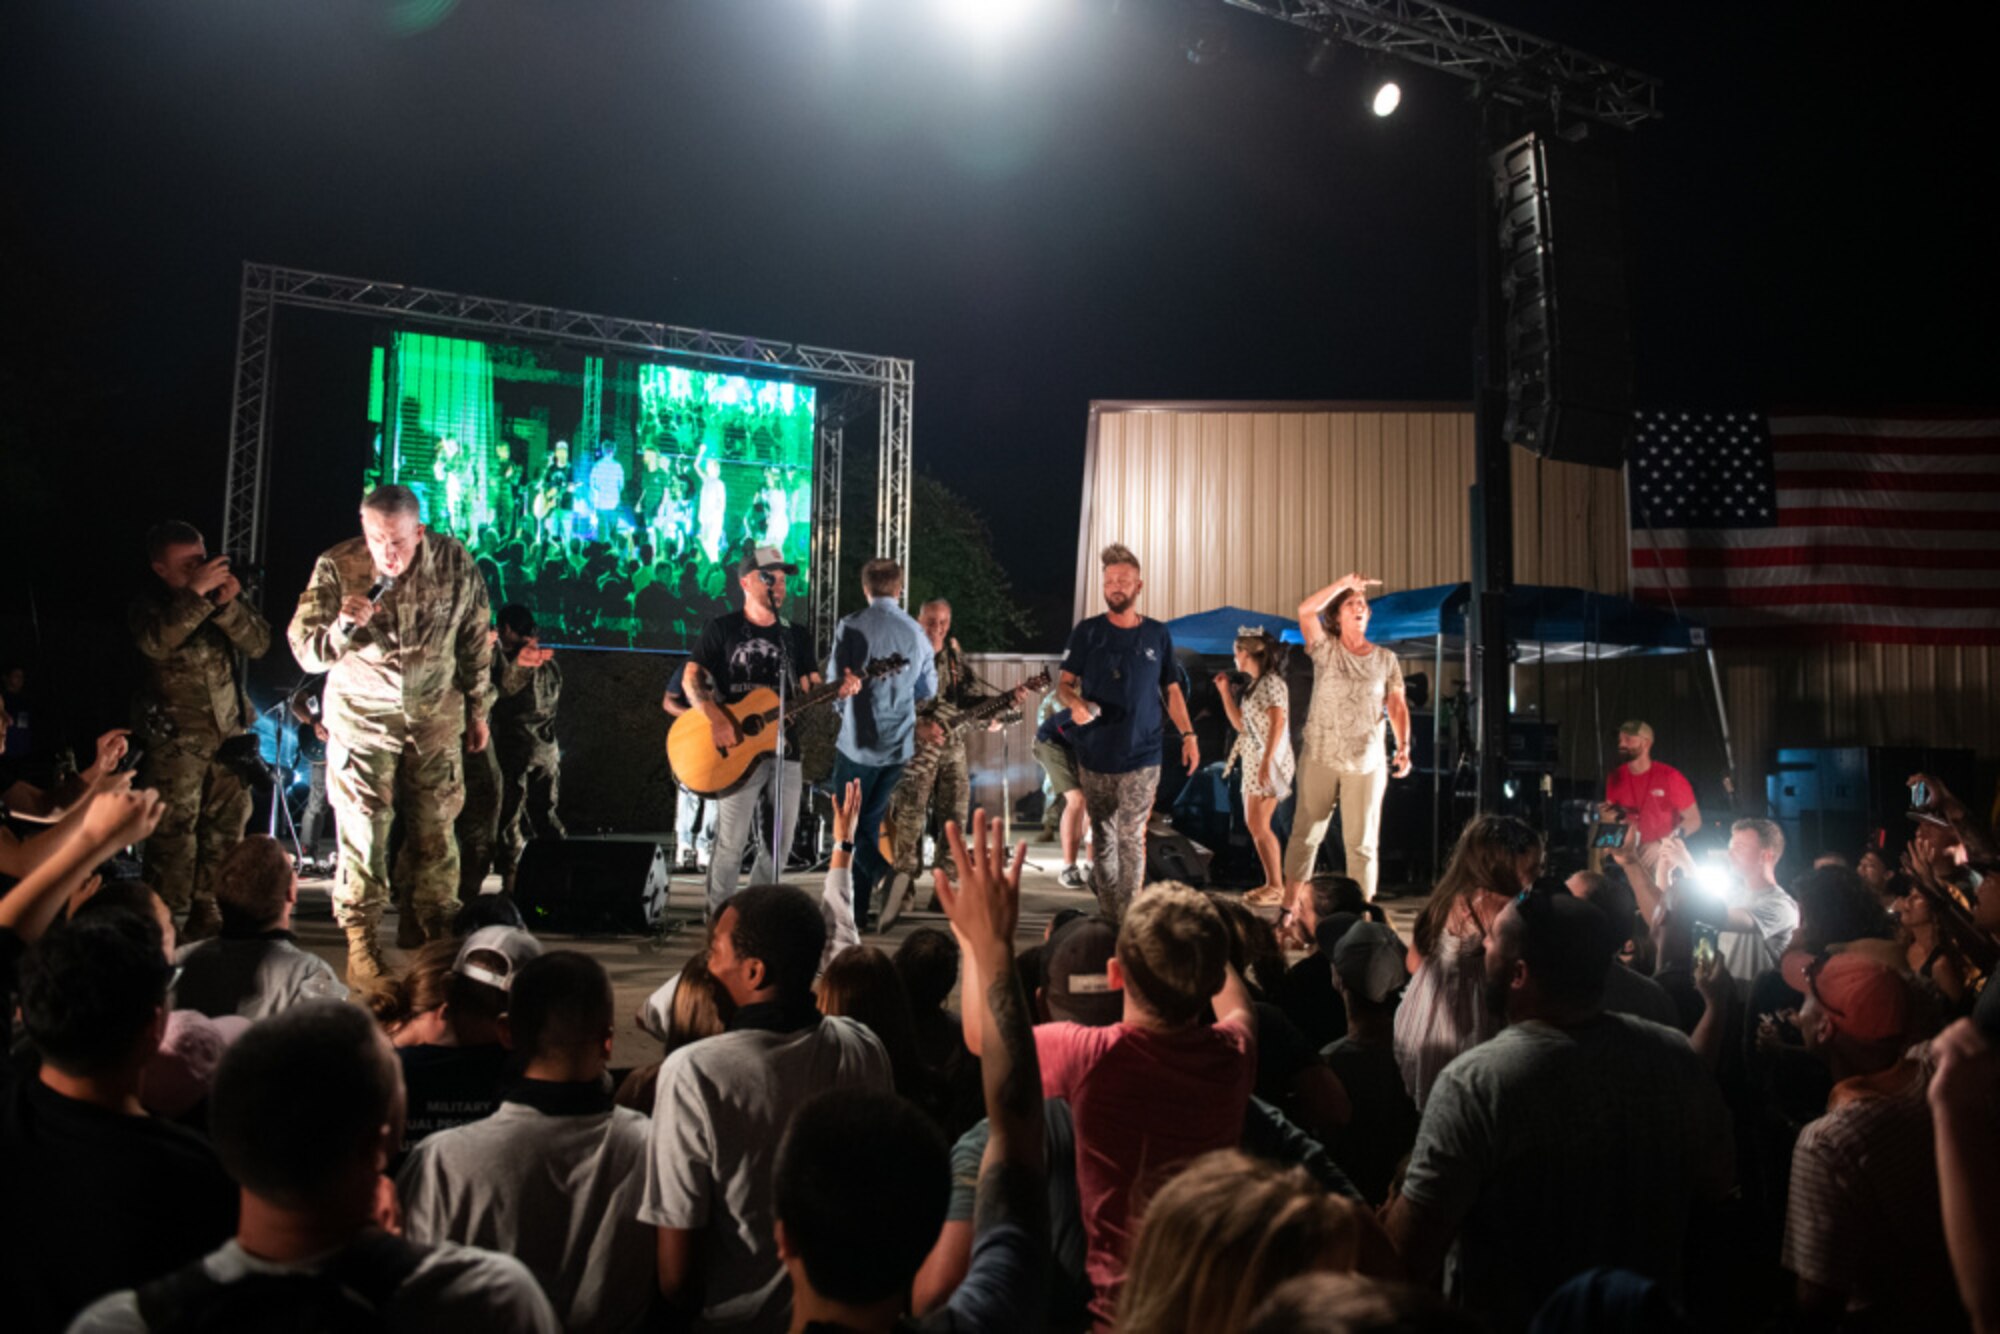 The USO group performs on stage at JBSA-Lackland.